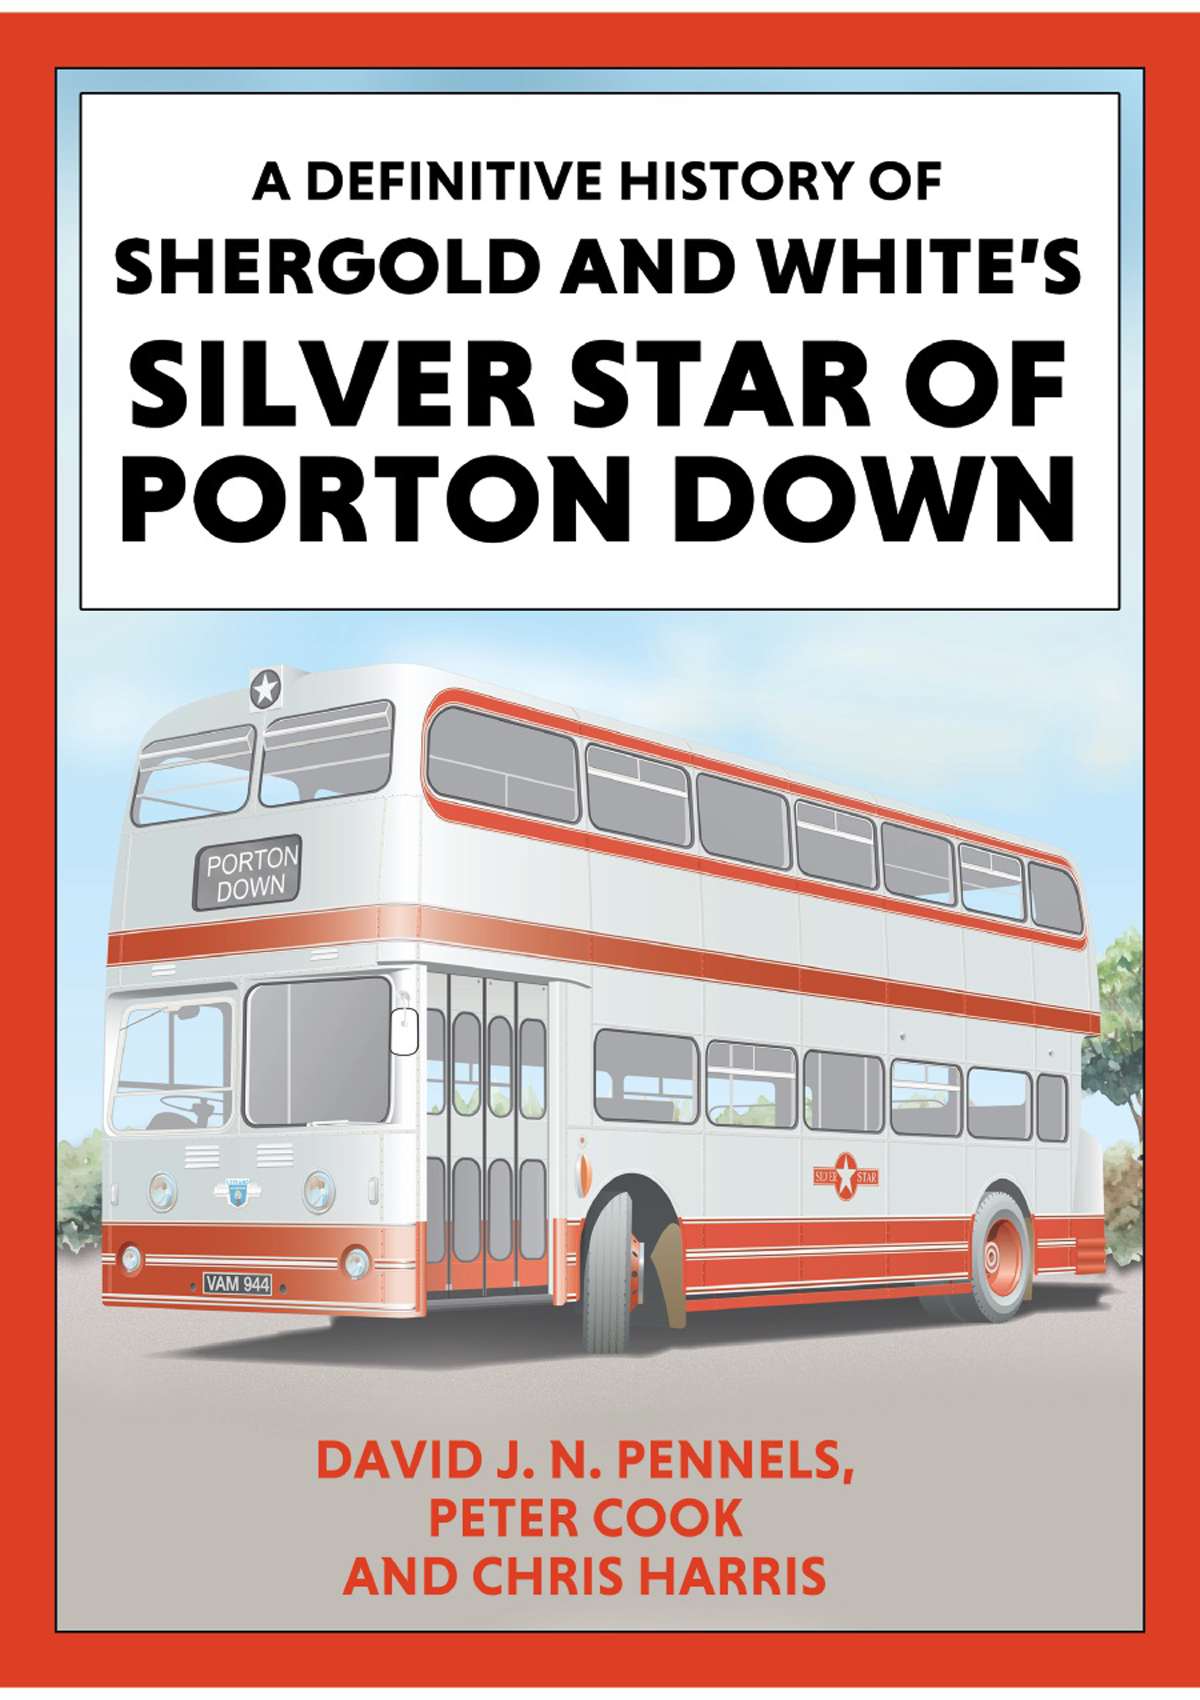 6017 - A Definitive History of Shergold and White Silver Star of Porton Down